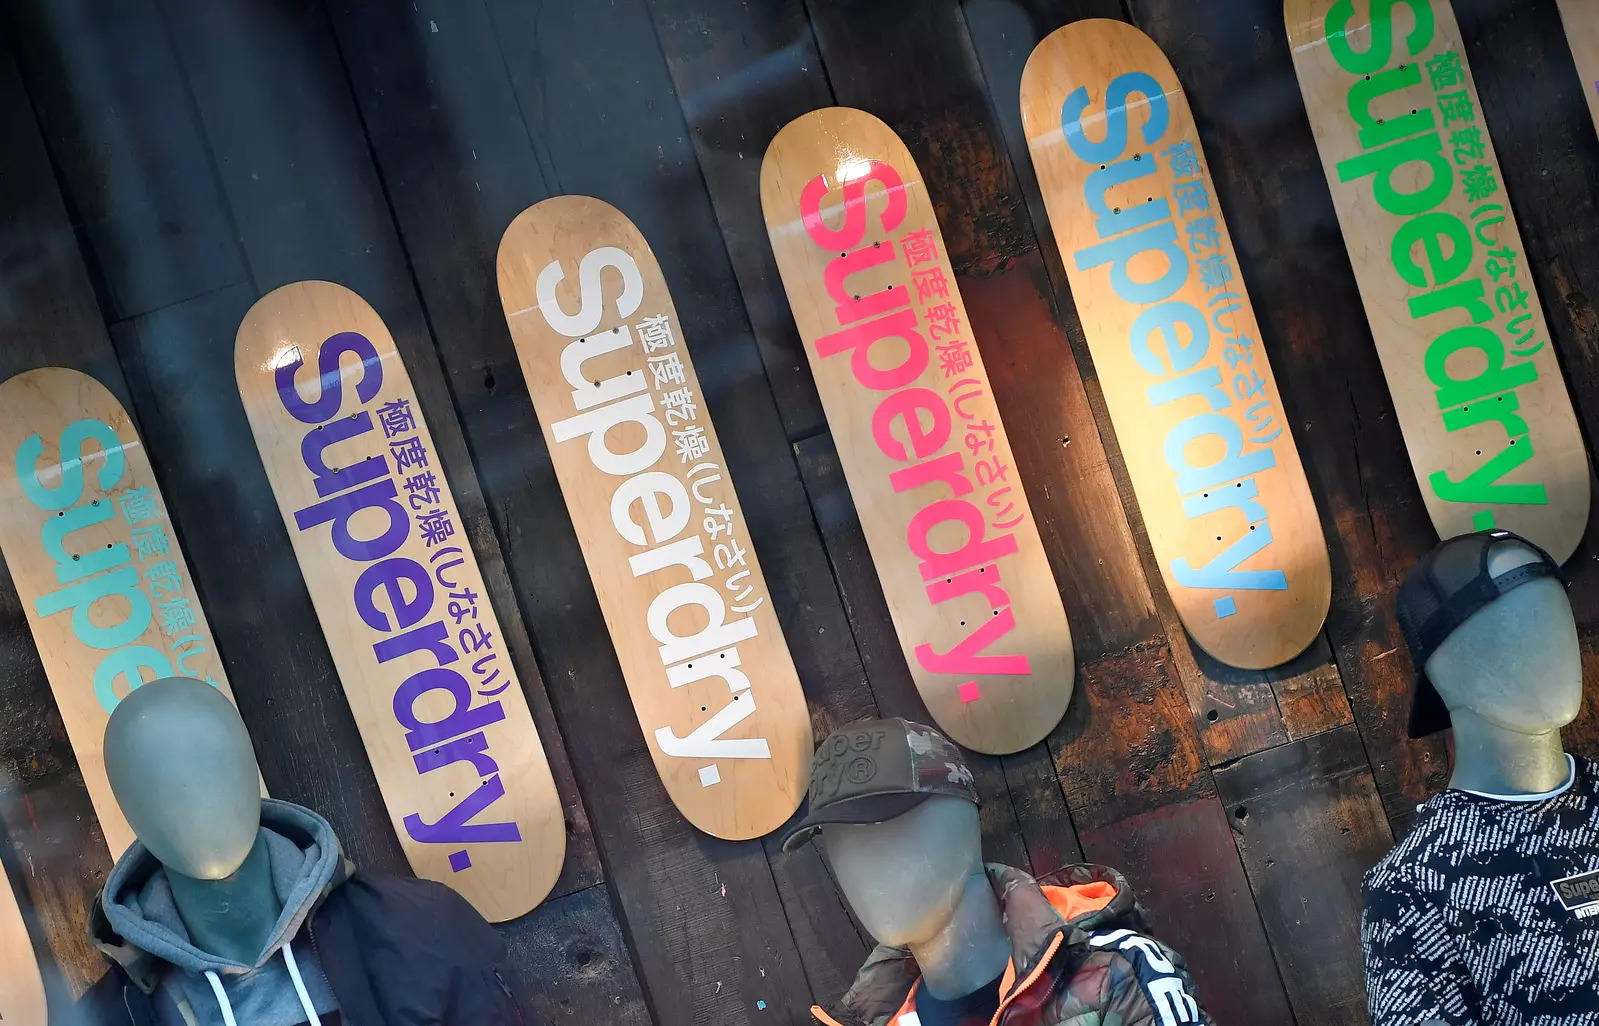 UK's Superdry faces weeks-long supply delays at wholesale business